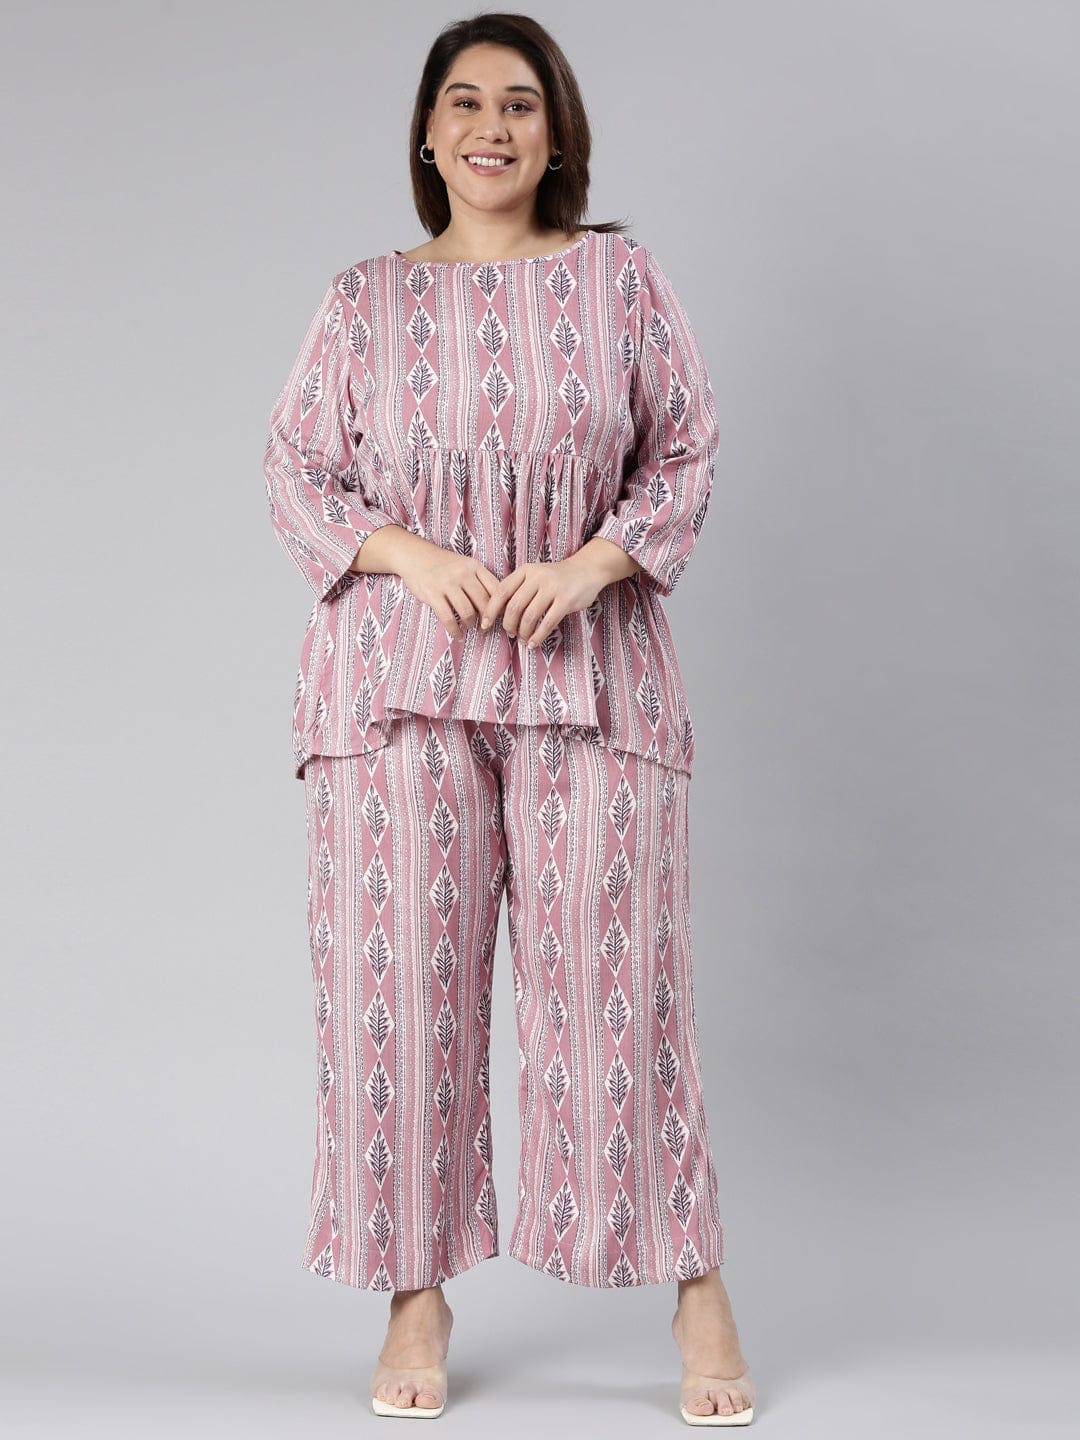 Buy  peplum dress /Women's /Pink ethnic printed  online from the Shaili at just Rs 999